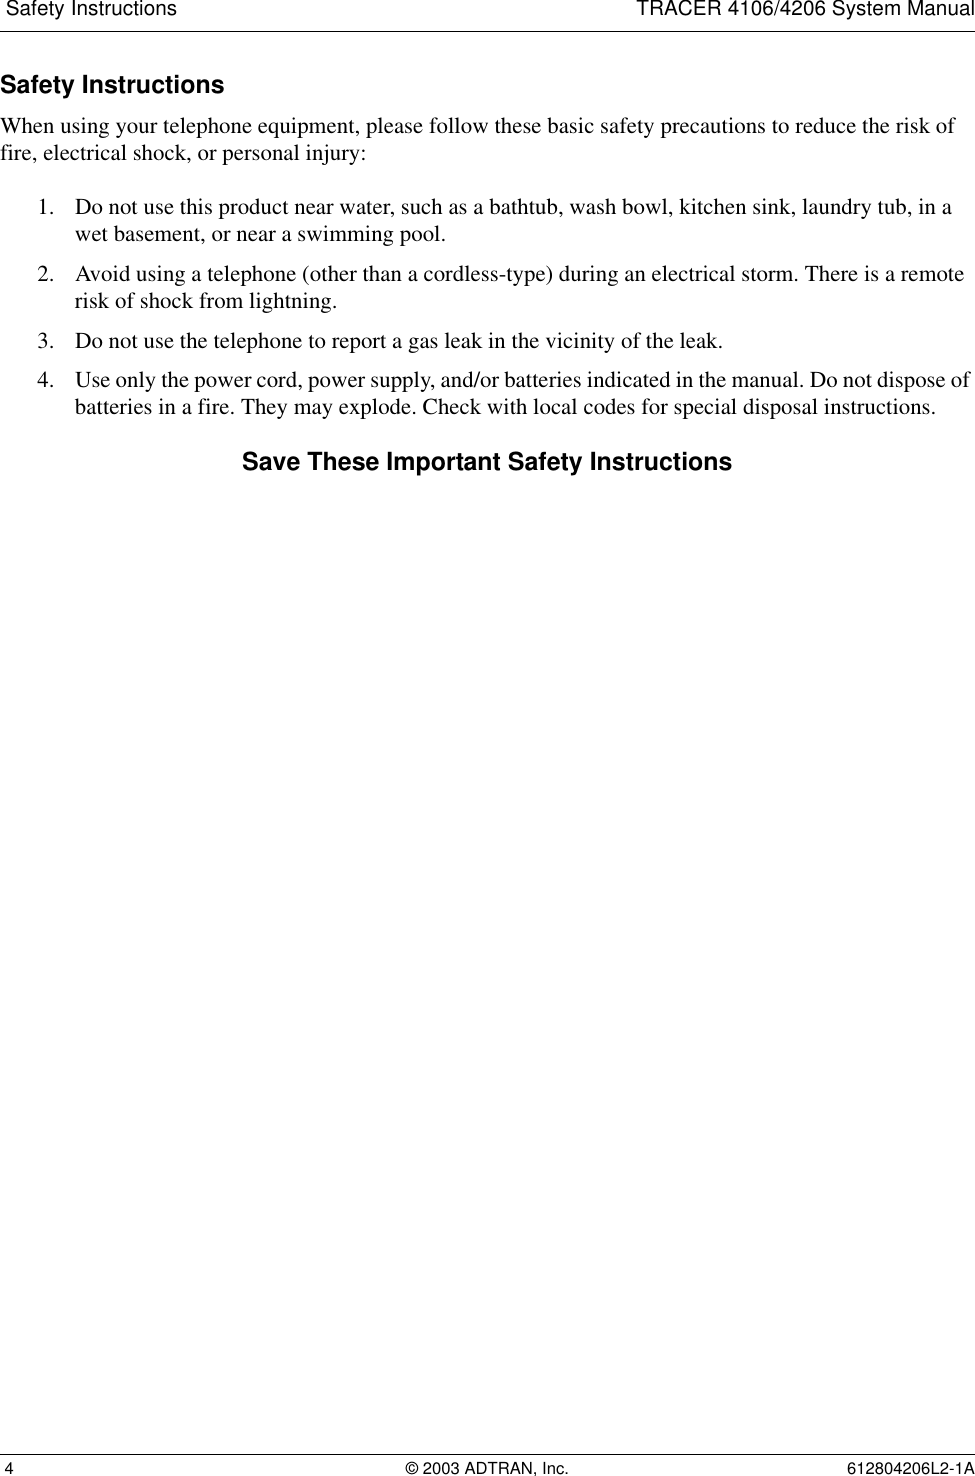  Safety Instructions TRACER 4106/4206 System Manual 4 © 2003 ADTRAN, Inc. 612804206L2-1ASafety InstructionsWhen using your telephone equipment, please follow these basic safety precautions to reduce the risk of fire, electrical shock, or personal injury:1. Do not use this product near water, such as a bathtub, wash bowl, kitchen sink, laundry tub, in a wet basement, or near a swimming pool.2. Avoid using a telephone (other than a cordless-type) during an electrical storm. There is a remote risk of shock from lightning.3. Do not use the telephone to report a gas leak in the vicinity of the leak.4. Use only the power cord, power supply, and/or batteries indicated in the manual. Do not dispose of batteries in a fire. They may explode. Check with local codes for special disposal instructions.Save These Important Safety Instructions